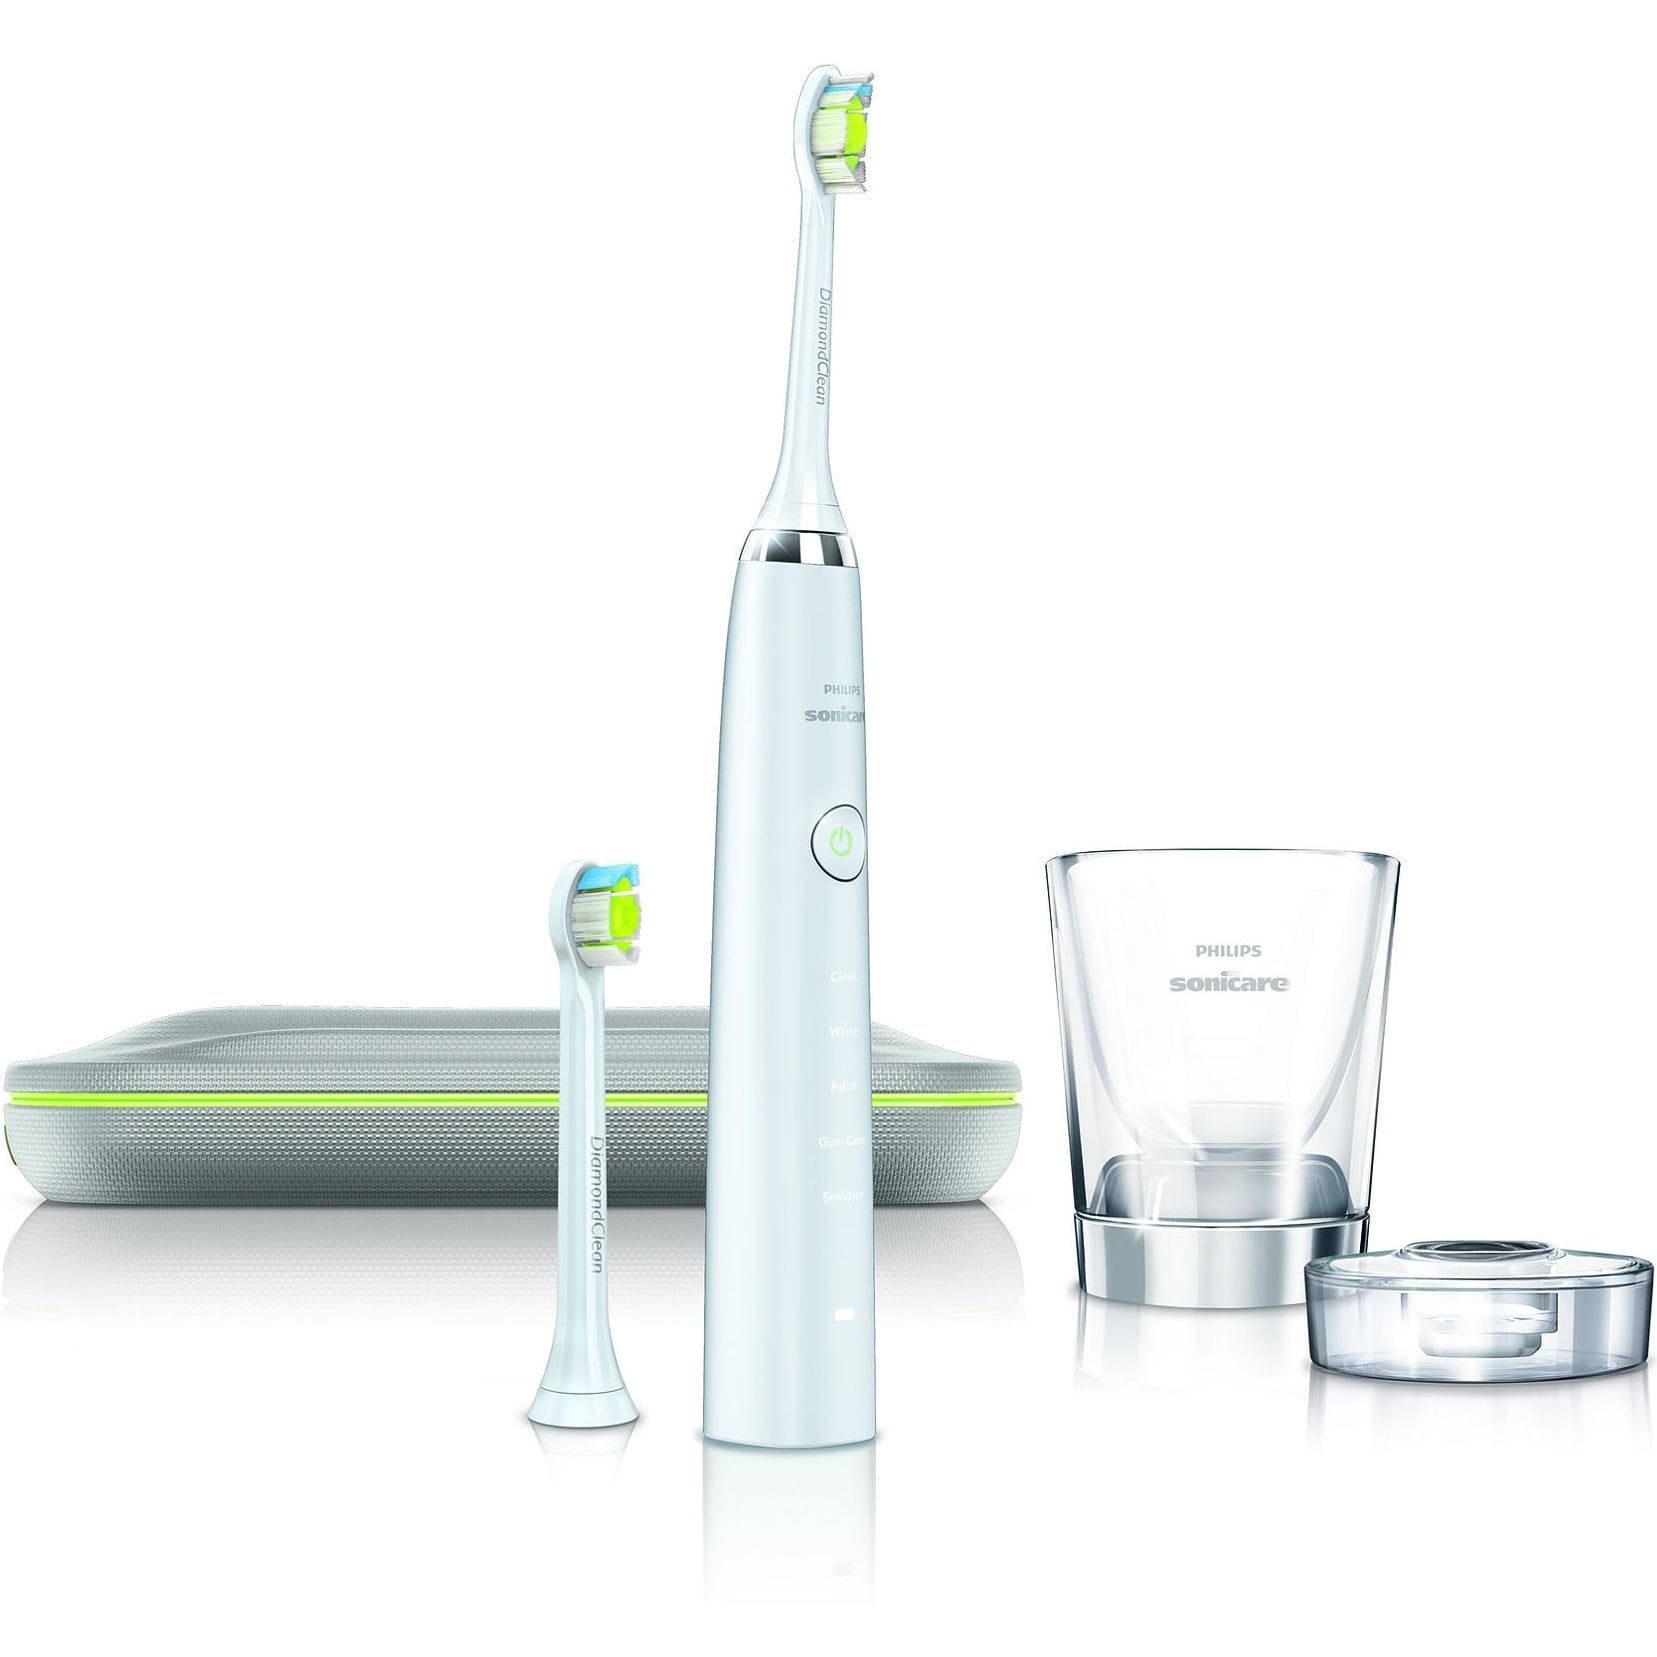 Philips Sonicare DiamondClean Electric Toothbrush 2015 model White Edition